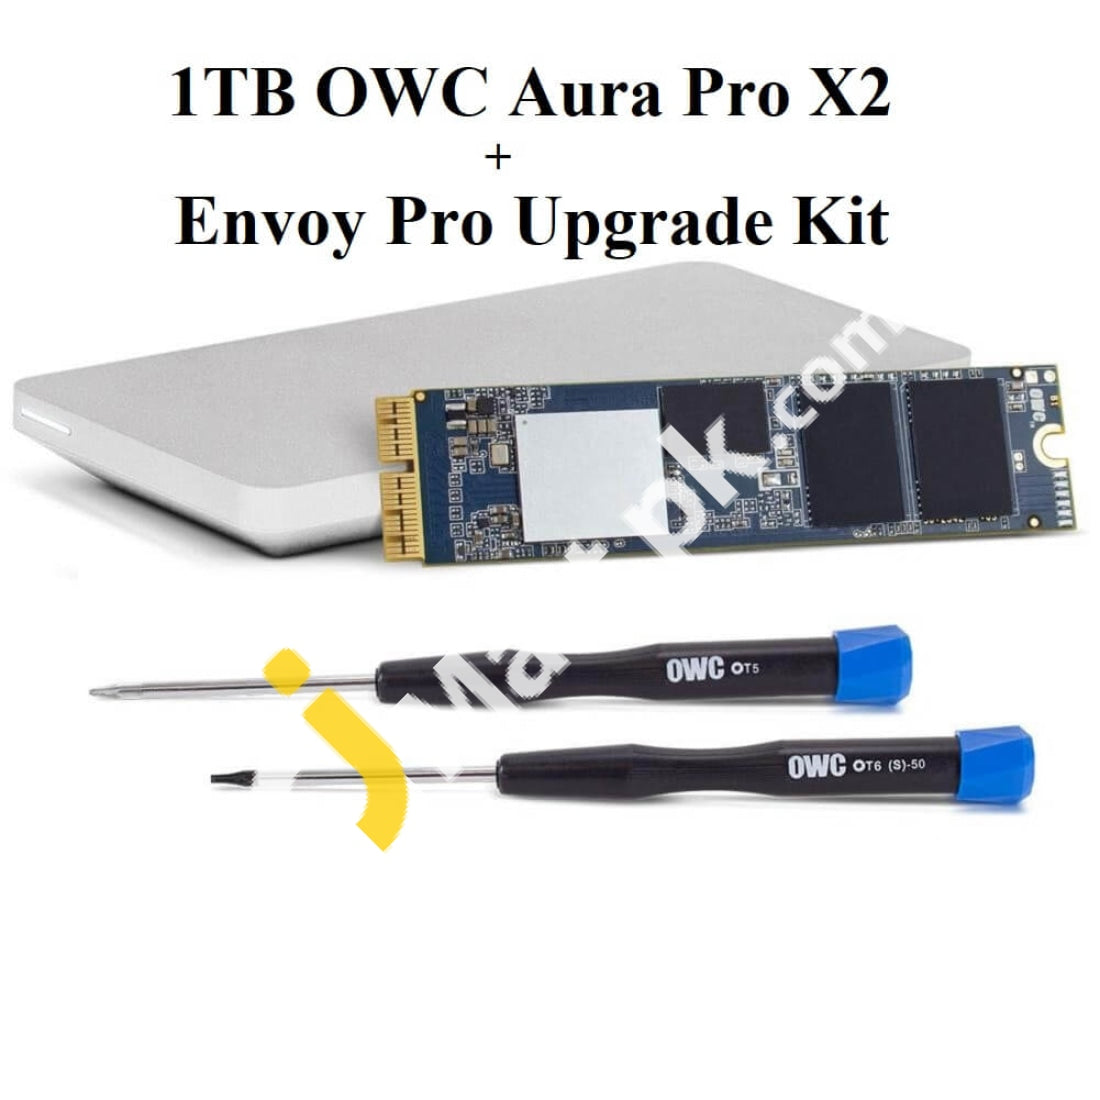 Owc Aura Pro X2 1Tb Ssd With Envoy Upgrade Kit For Macbook Retina Display - Imported From Uk